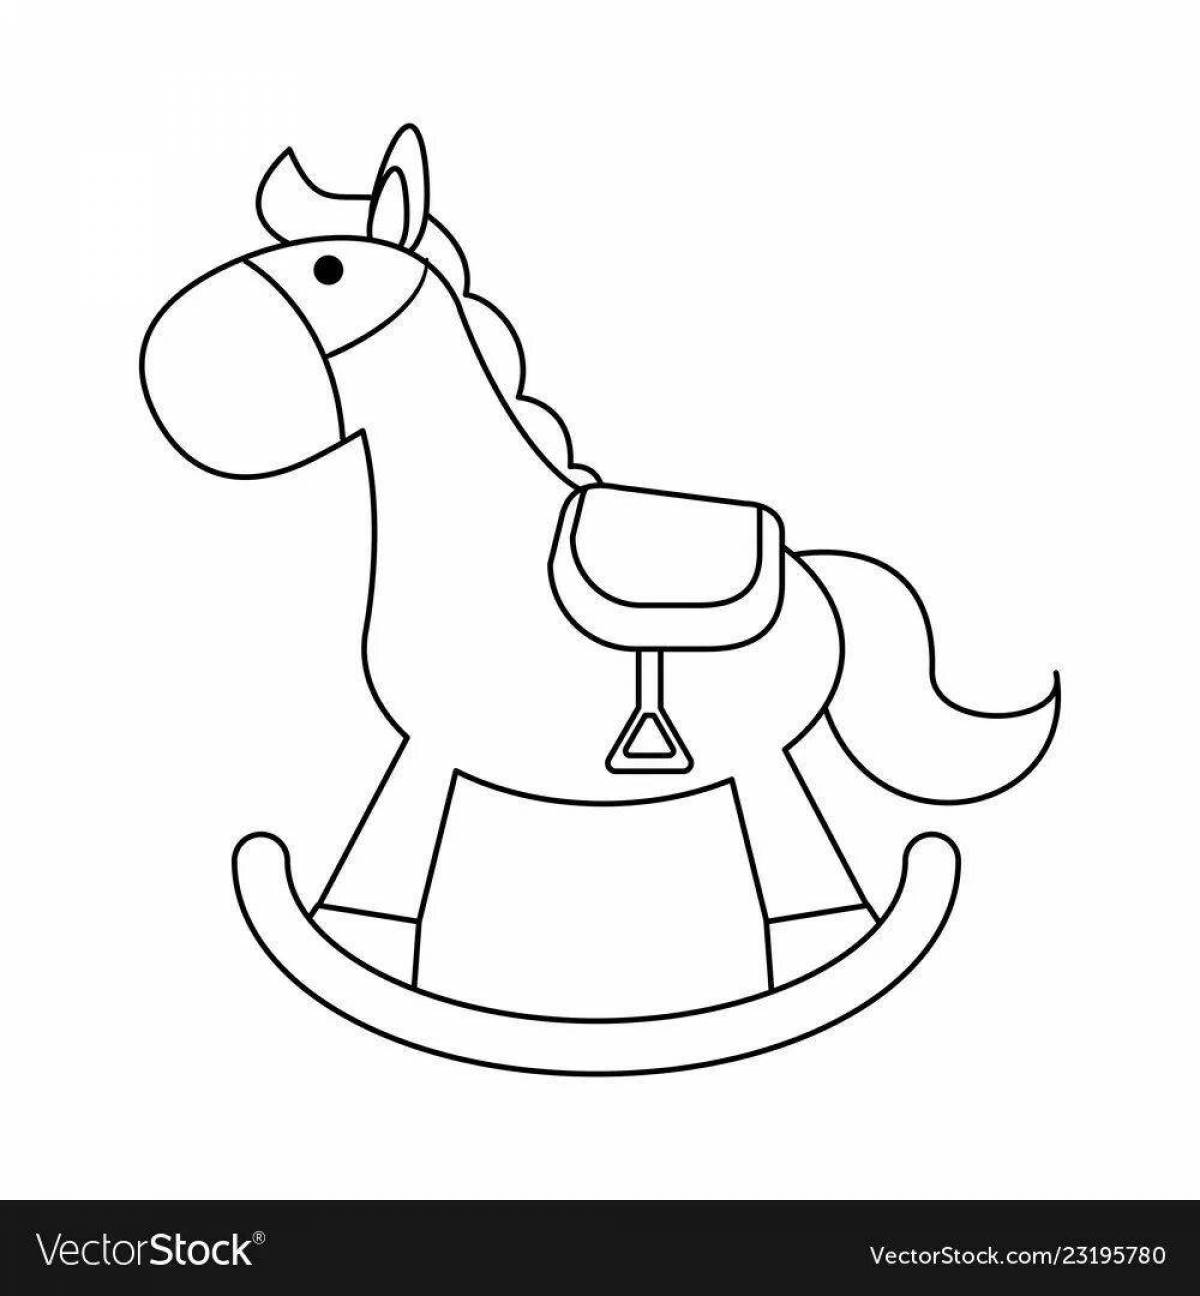 Coloring cute rocking horse